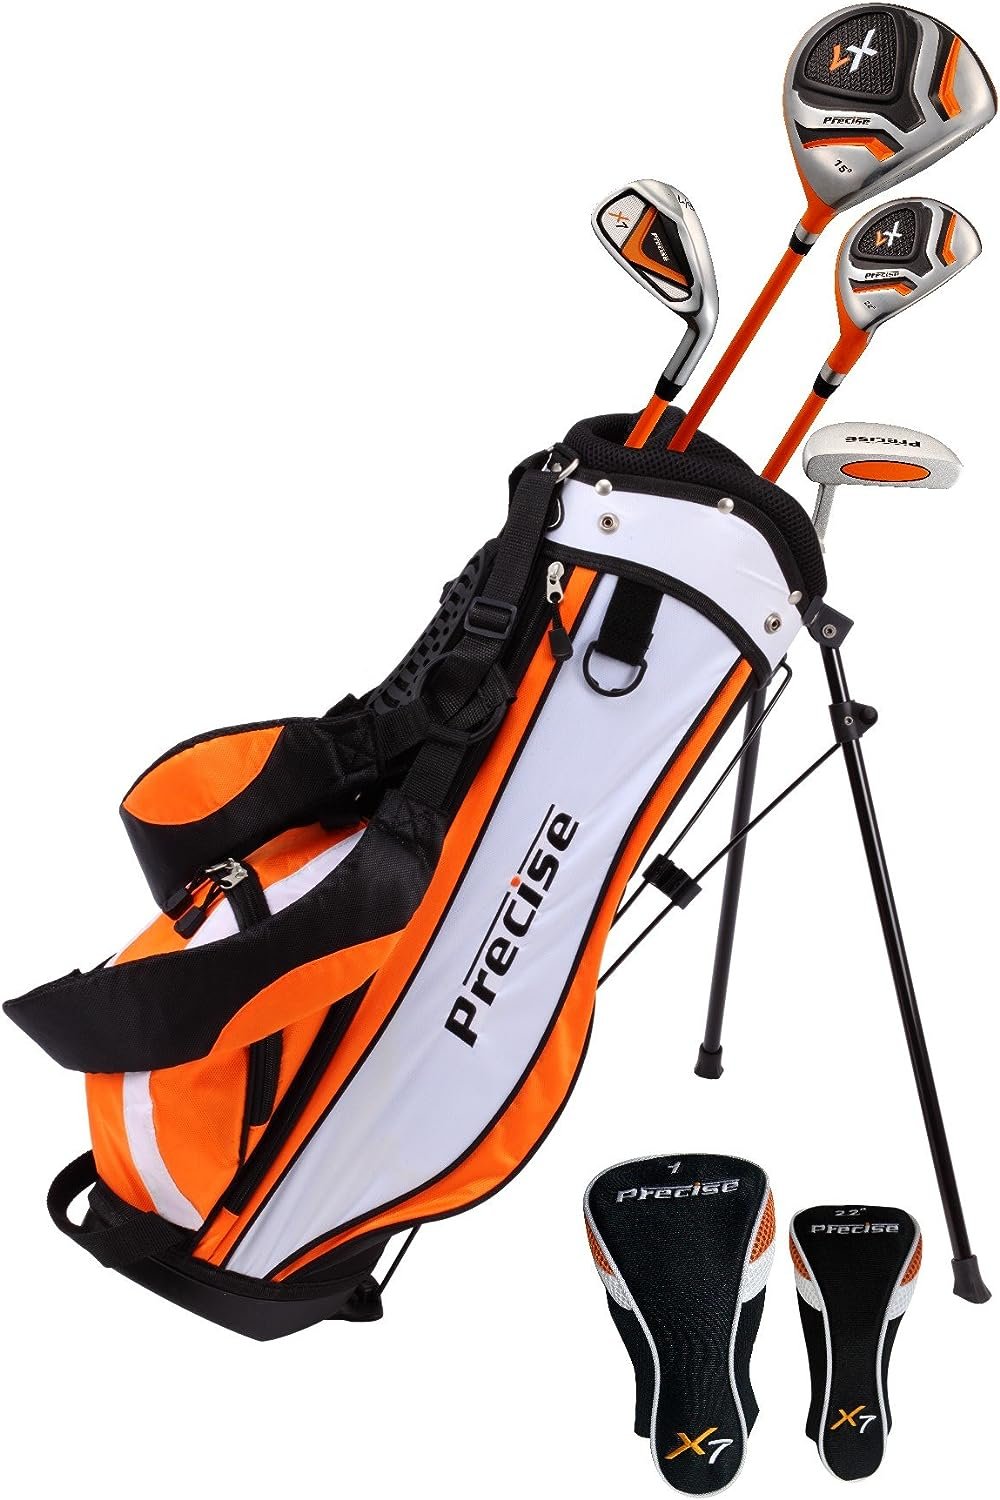 Precise Distinctive Left Handed Junior Golf Club Set for Age 3 to 5 (Height 3 to 38), Set Includes: Driver (15), Hybrid Wood (22, 7 Iron, Putter, Bonus Stand Bag  2 Headcovers